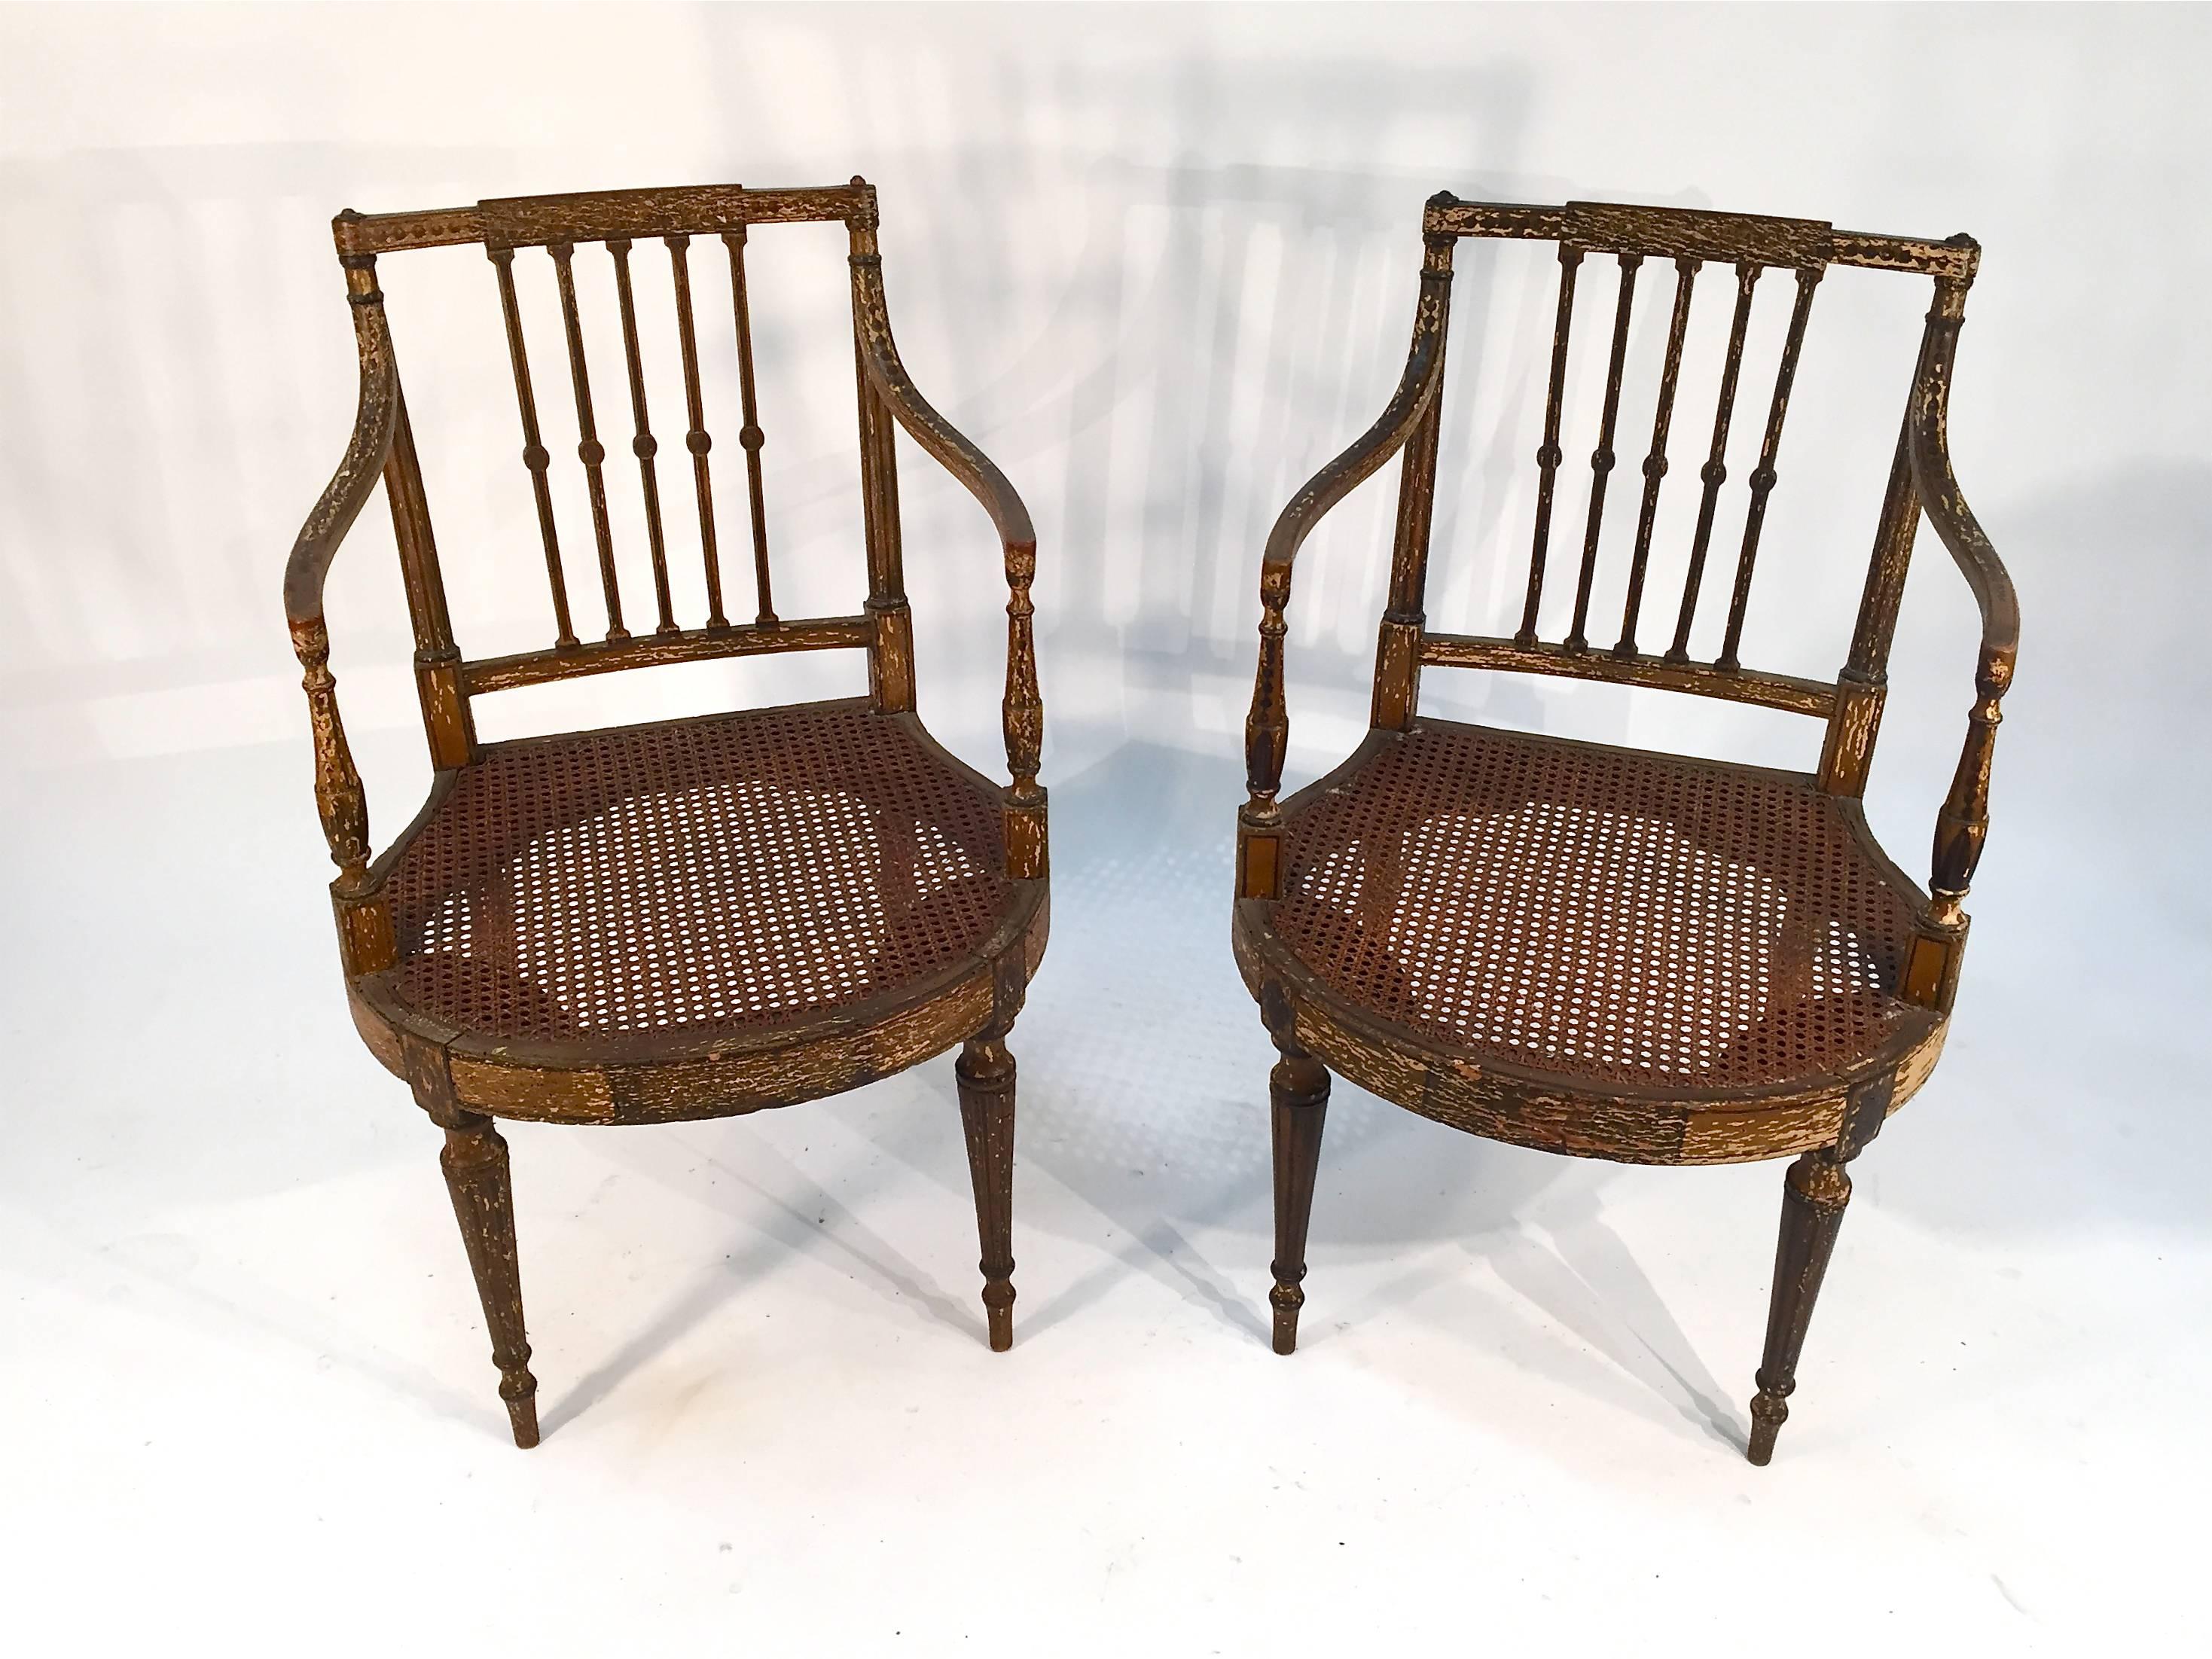 Pair of painted armchairs with cane seats. English, 19th century.